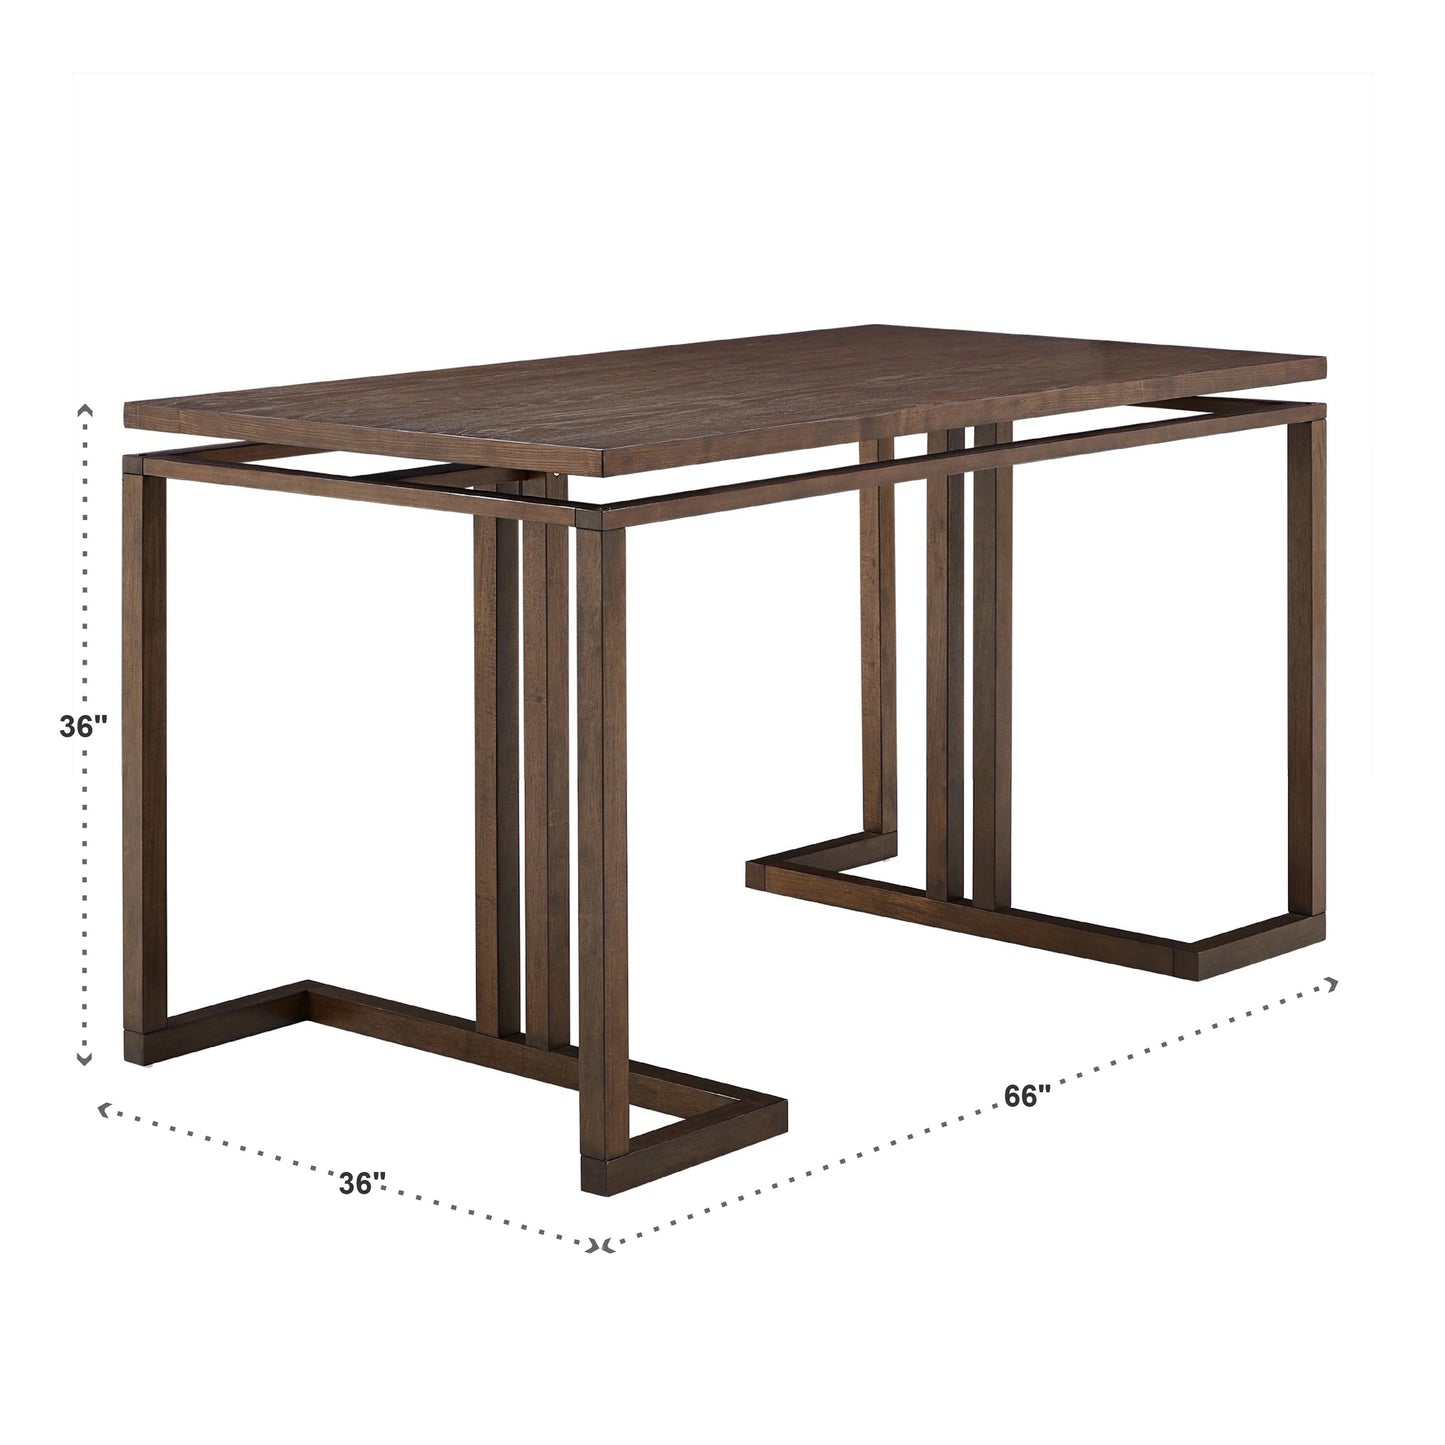 Rectangular Counter Height Dining Table - With One Storage Cabinet